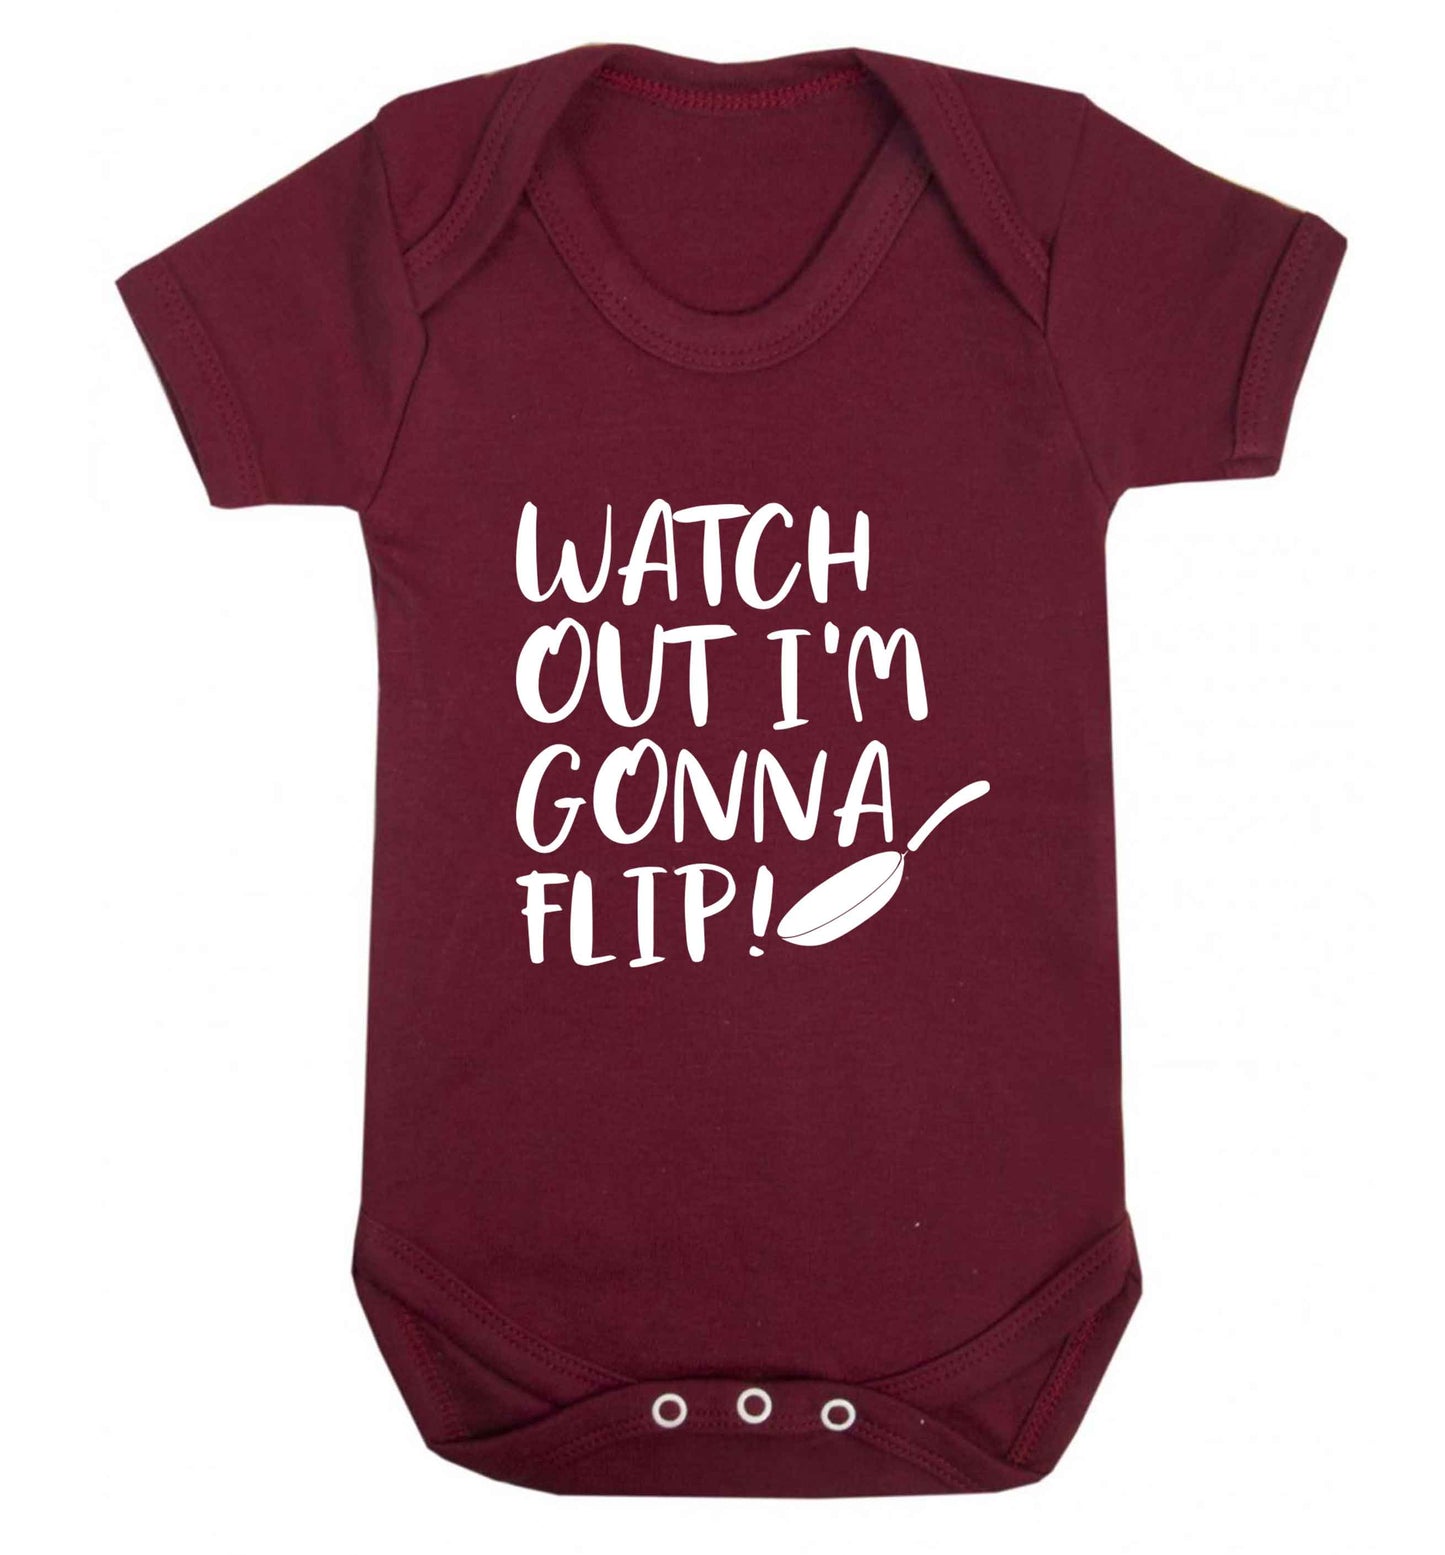 Watch out I'm gonna flip! baby vest maroon 18-24 months